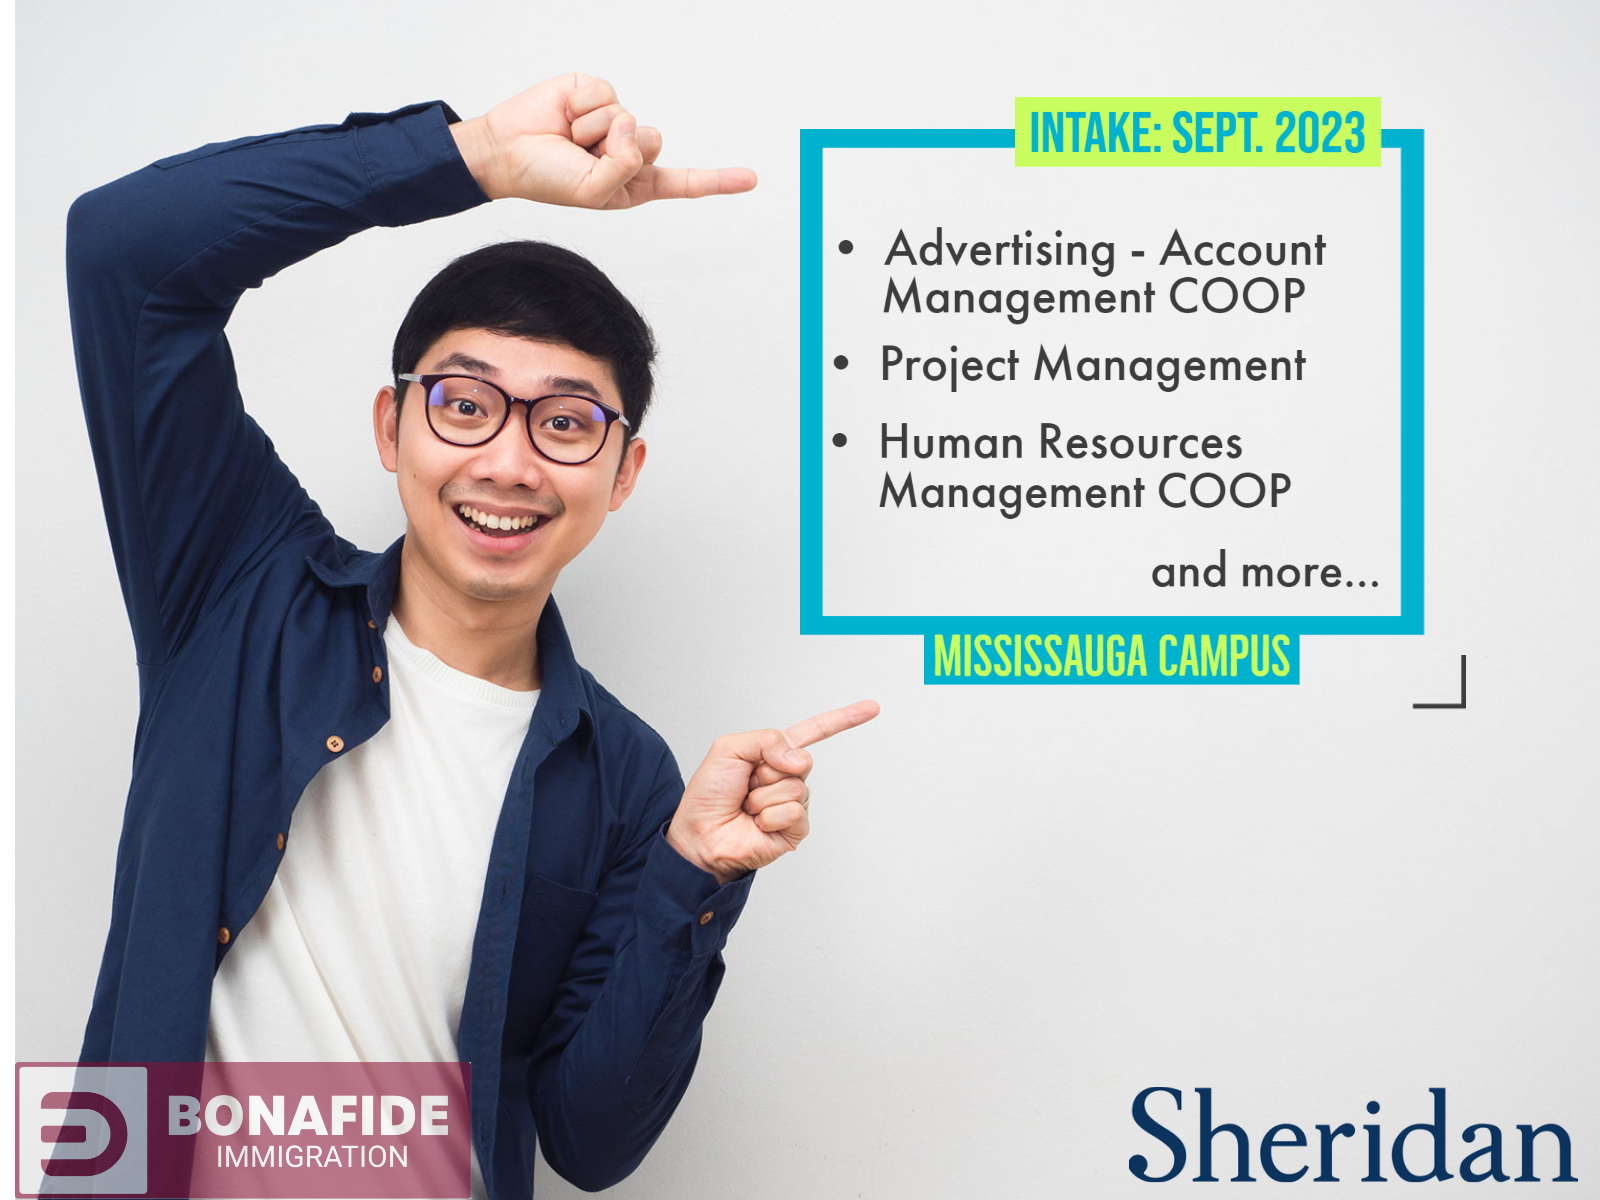 admission for September intake 2023 to the Sheridan college in courses such as Advertising, project management, human resources COOP and more